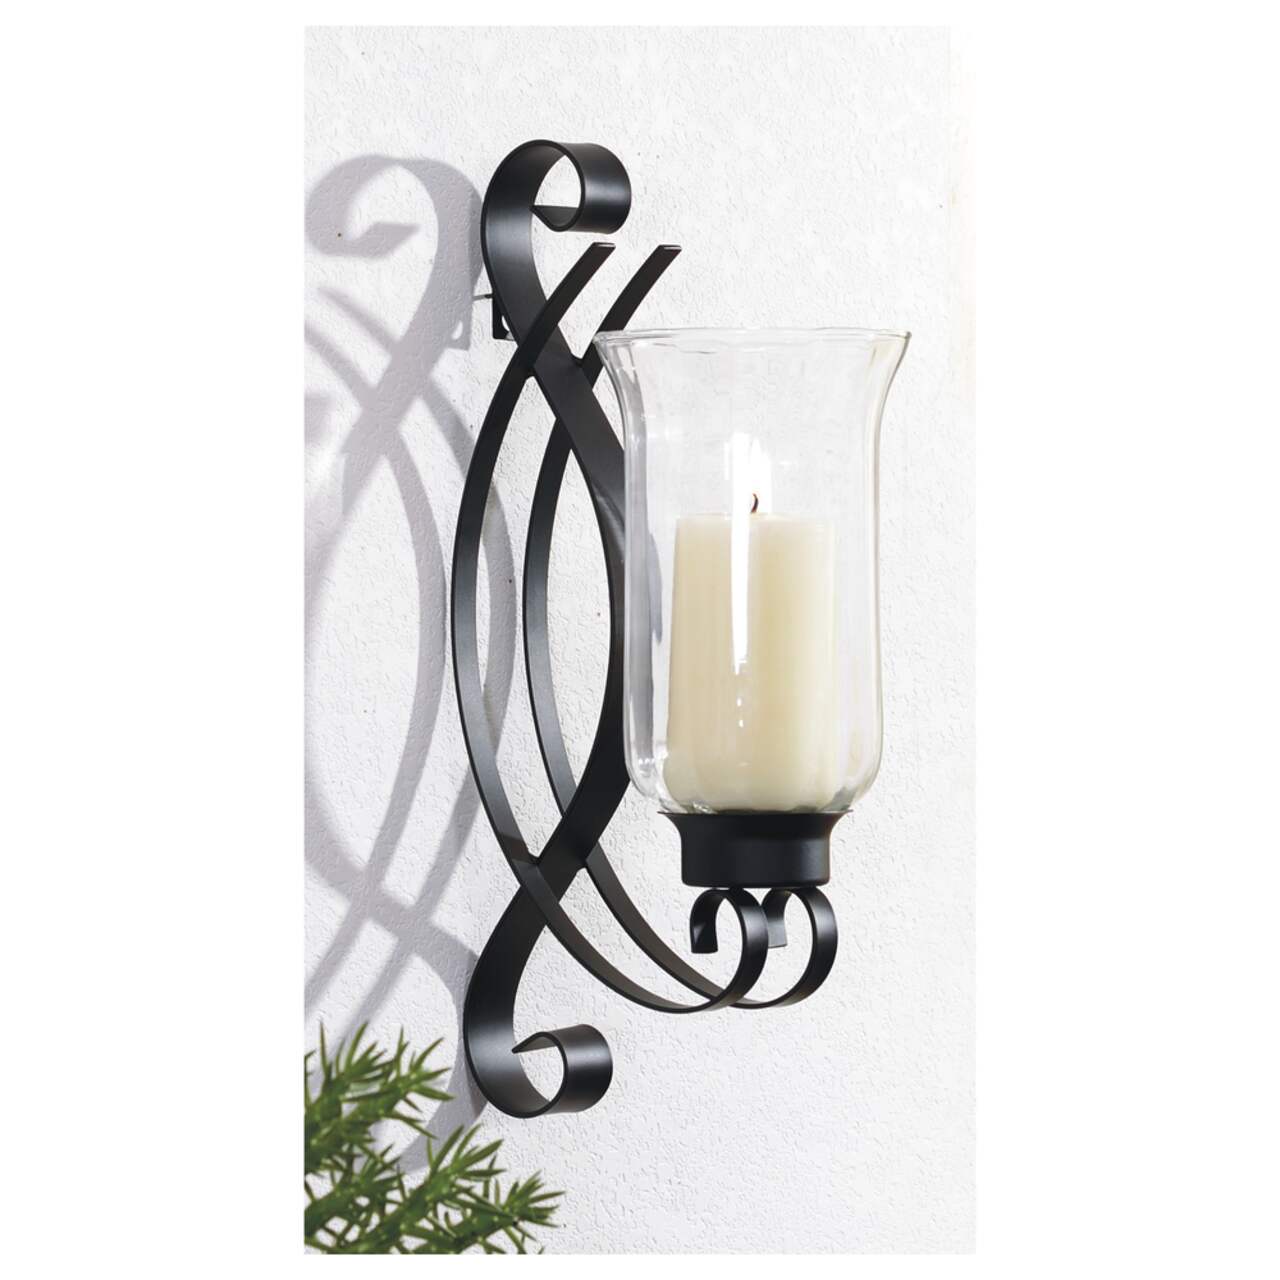 Northwood Collections Swirl Sconce Candle Holder, 4.5-in x 14-in